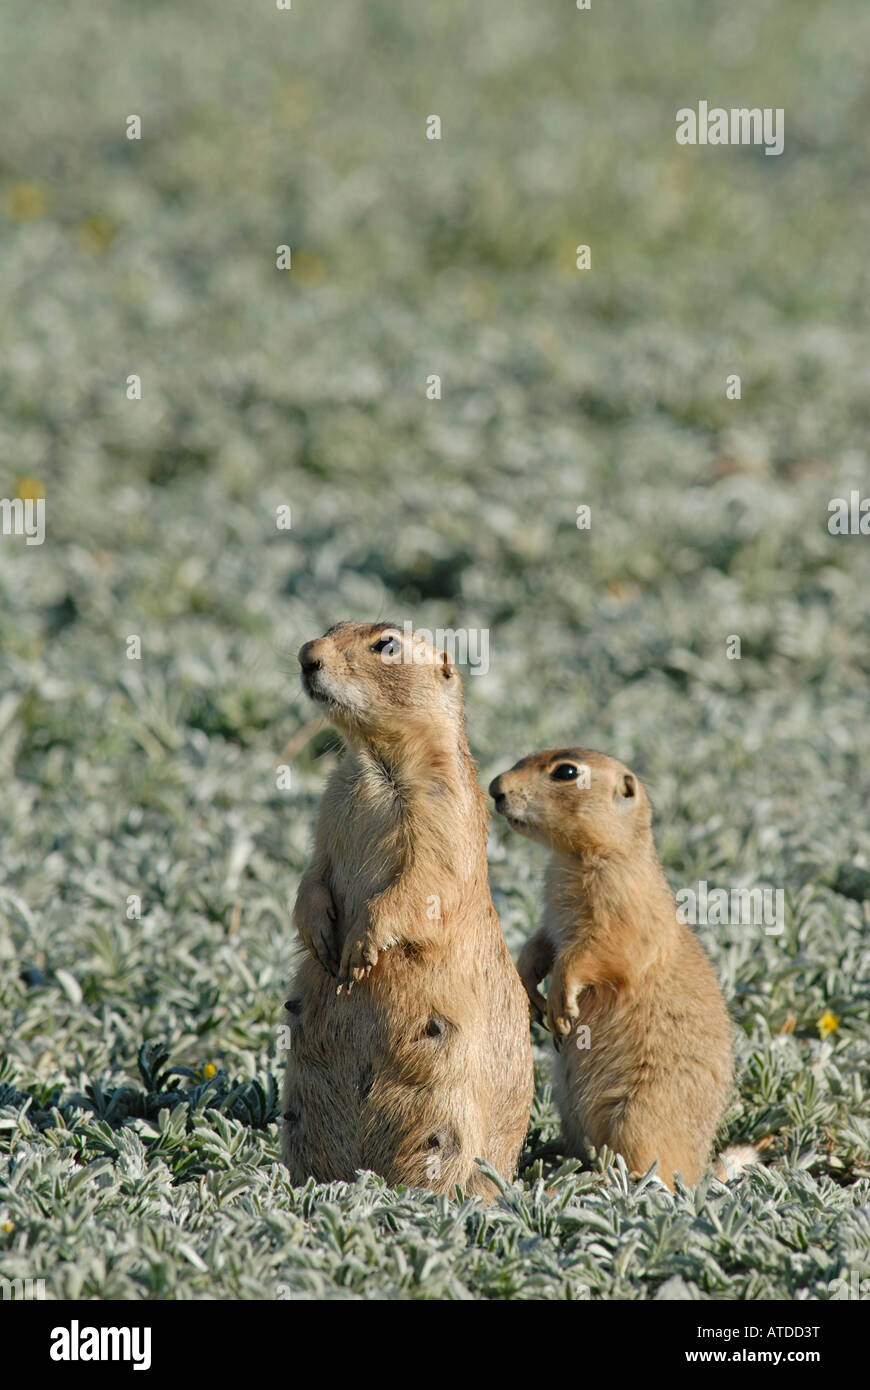 Stock photo of a utah prairie dog mother and pup standing together. Stock Photo